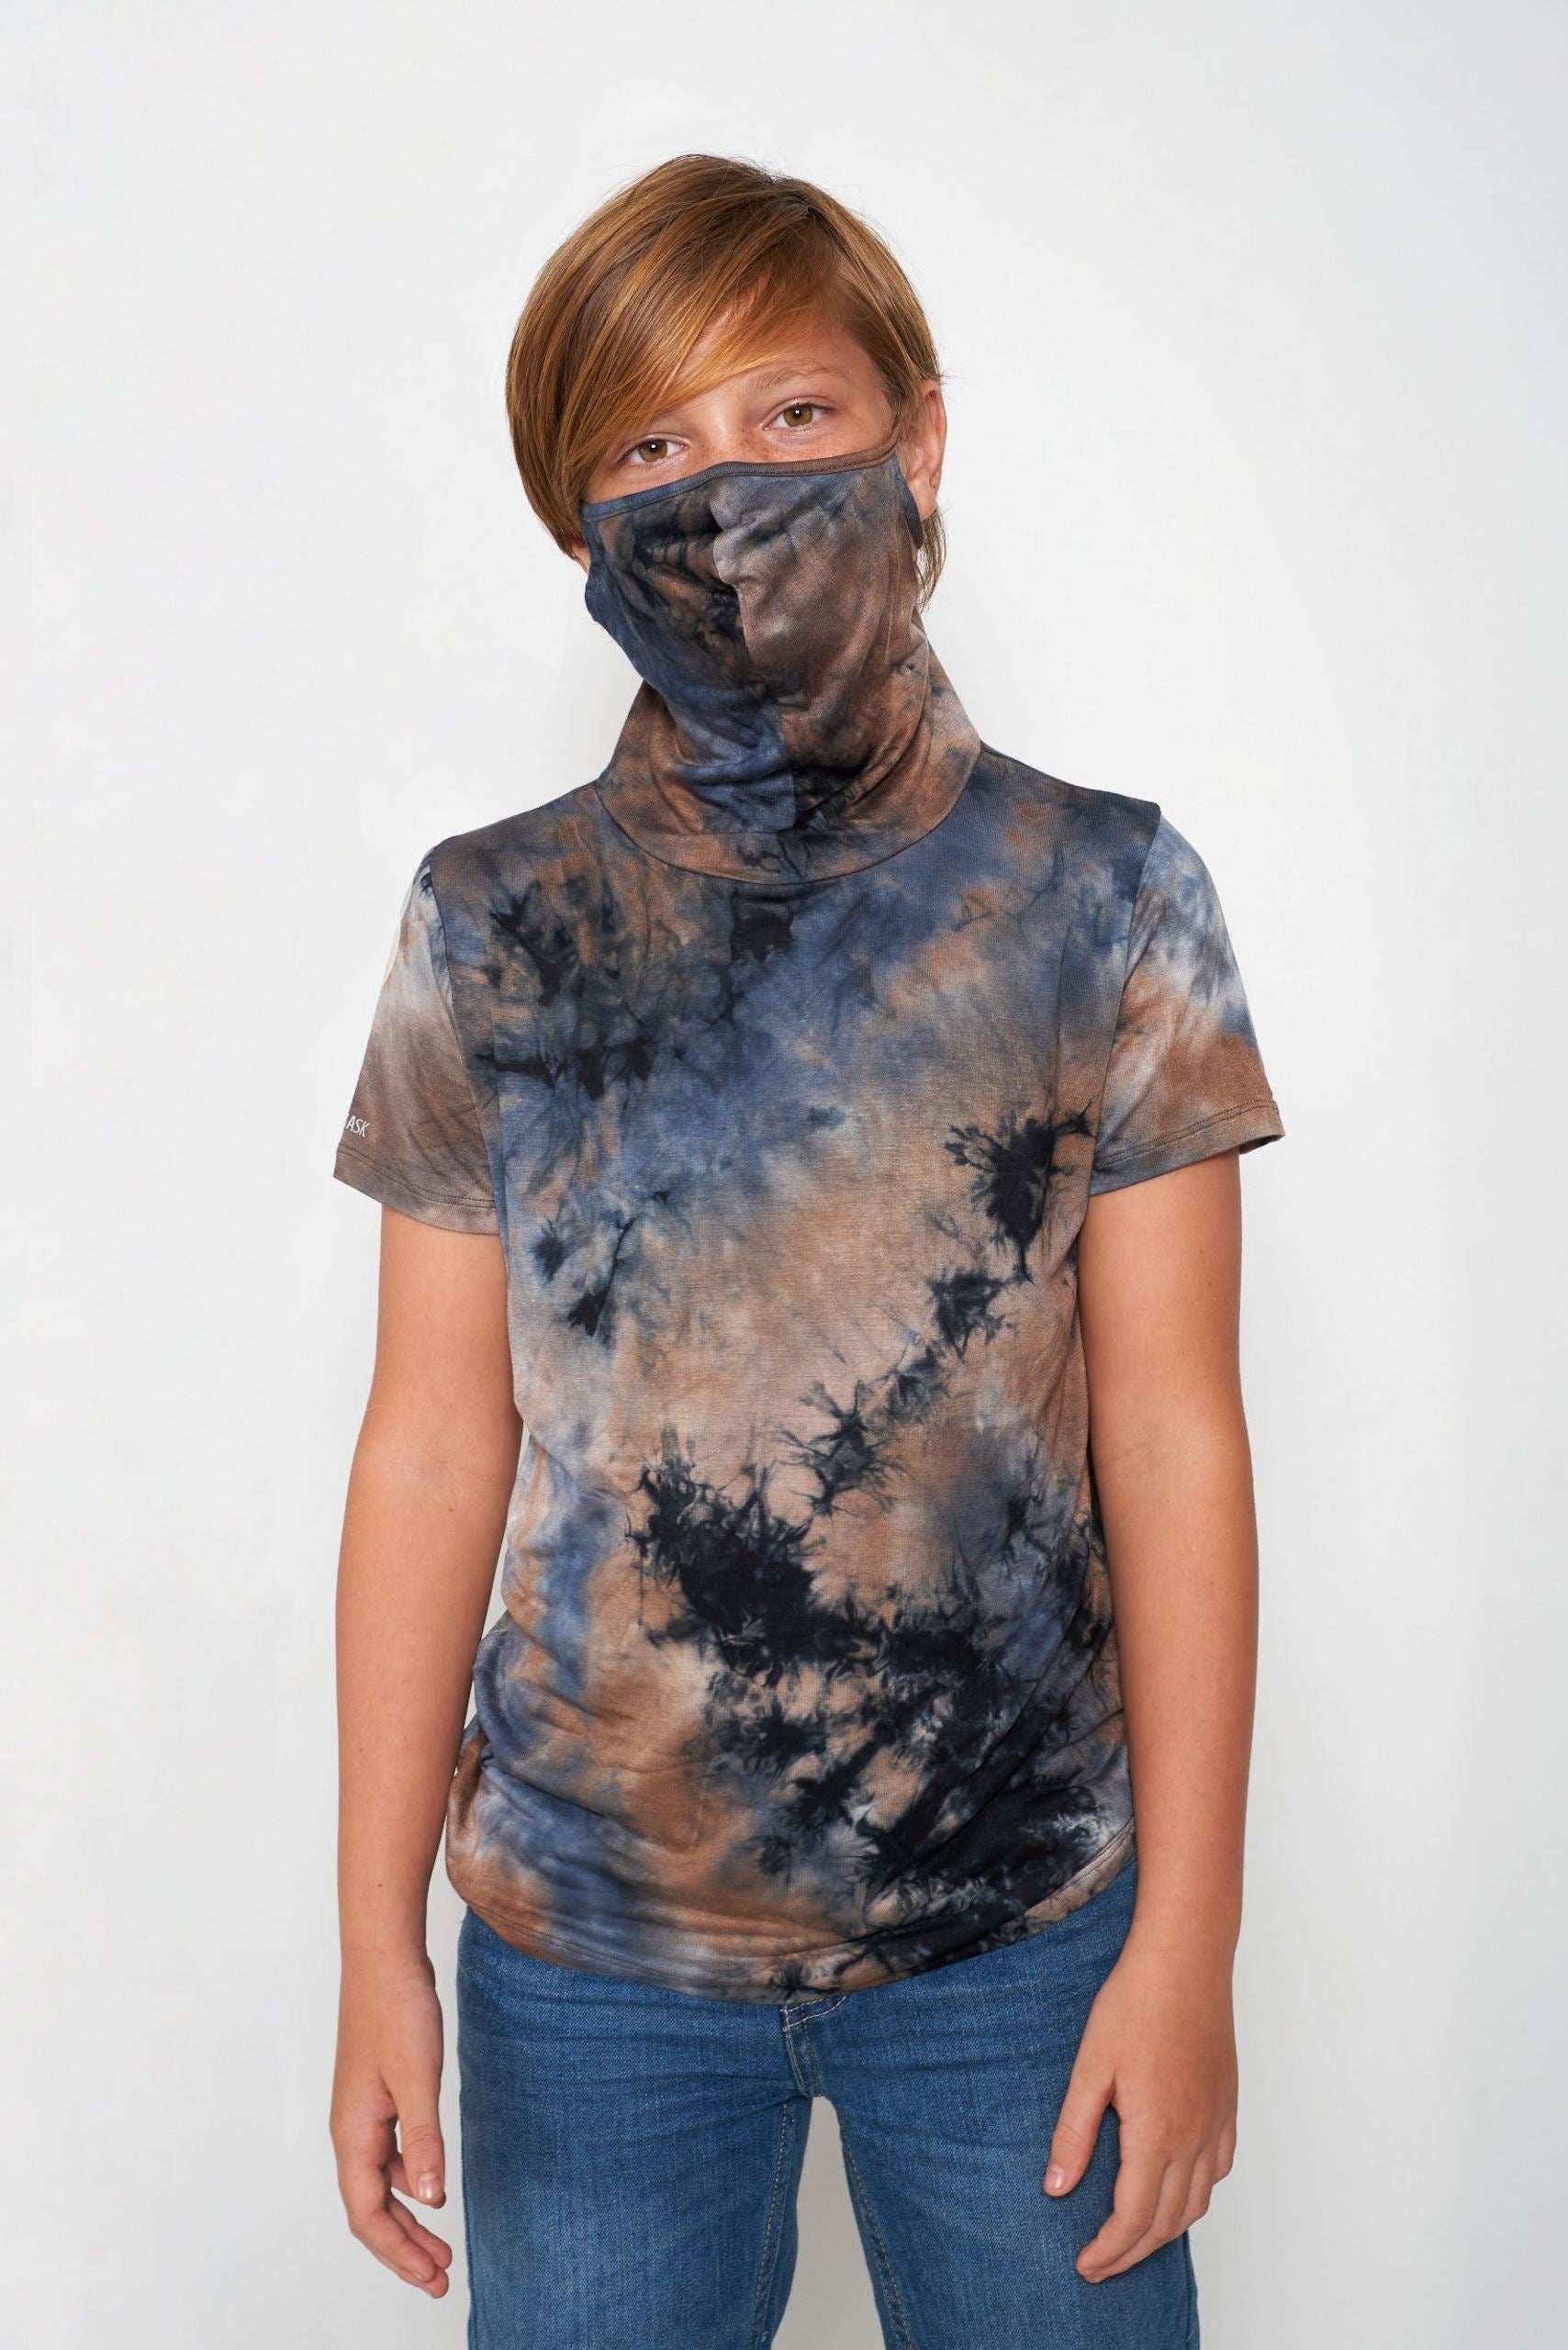 Kids Short Sleeve Blue Gray Black Brown Tie-dye #36 Shmask™ Earloop Face Mask for Kids and Adults